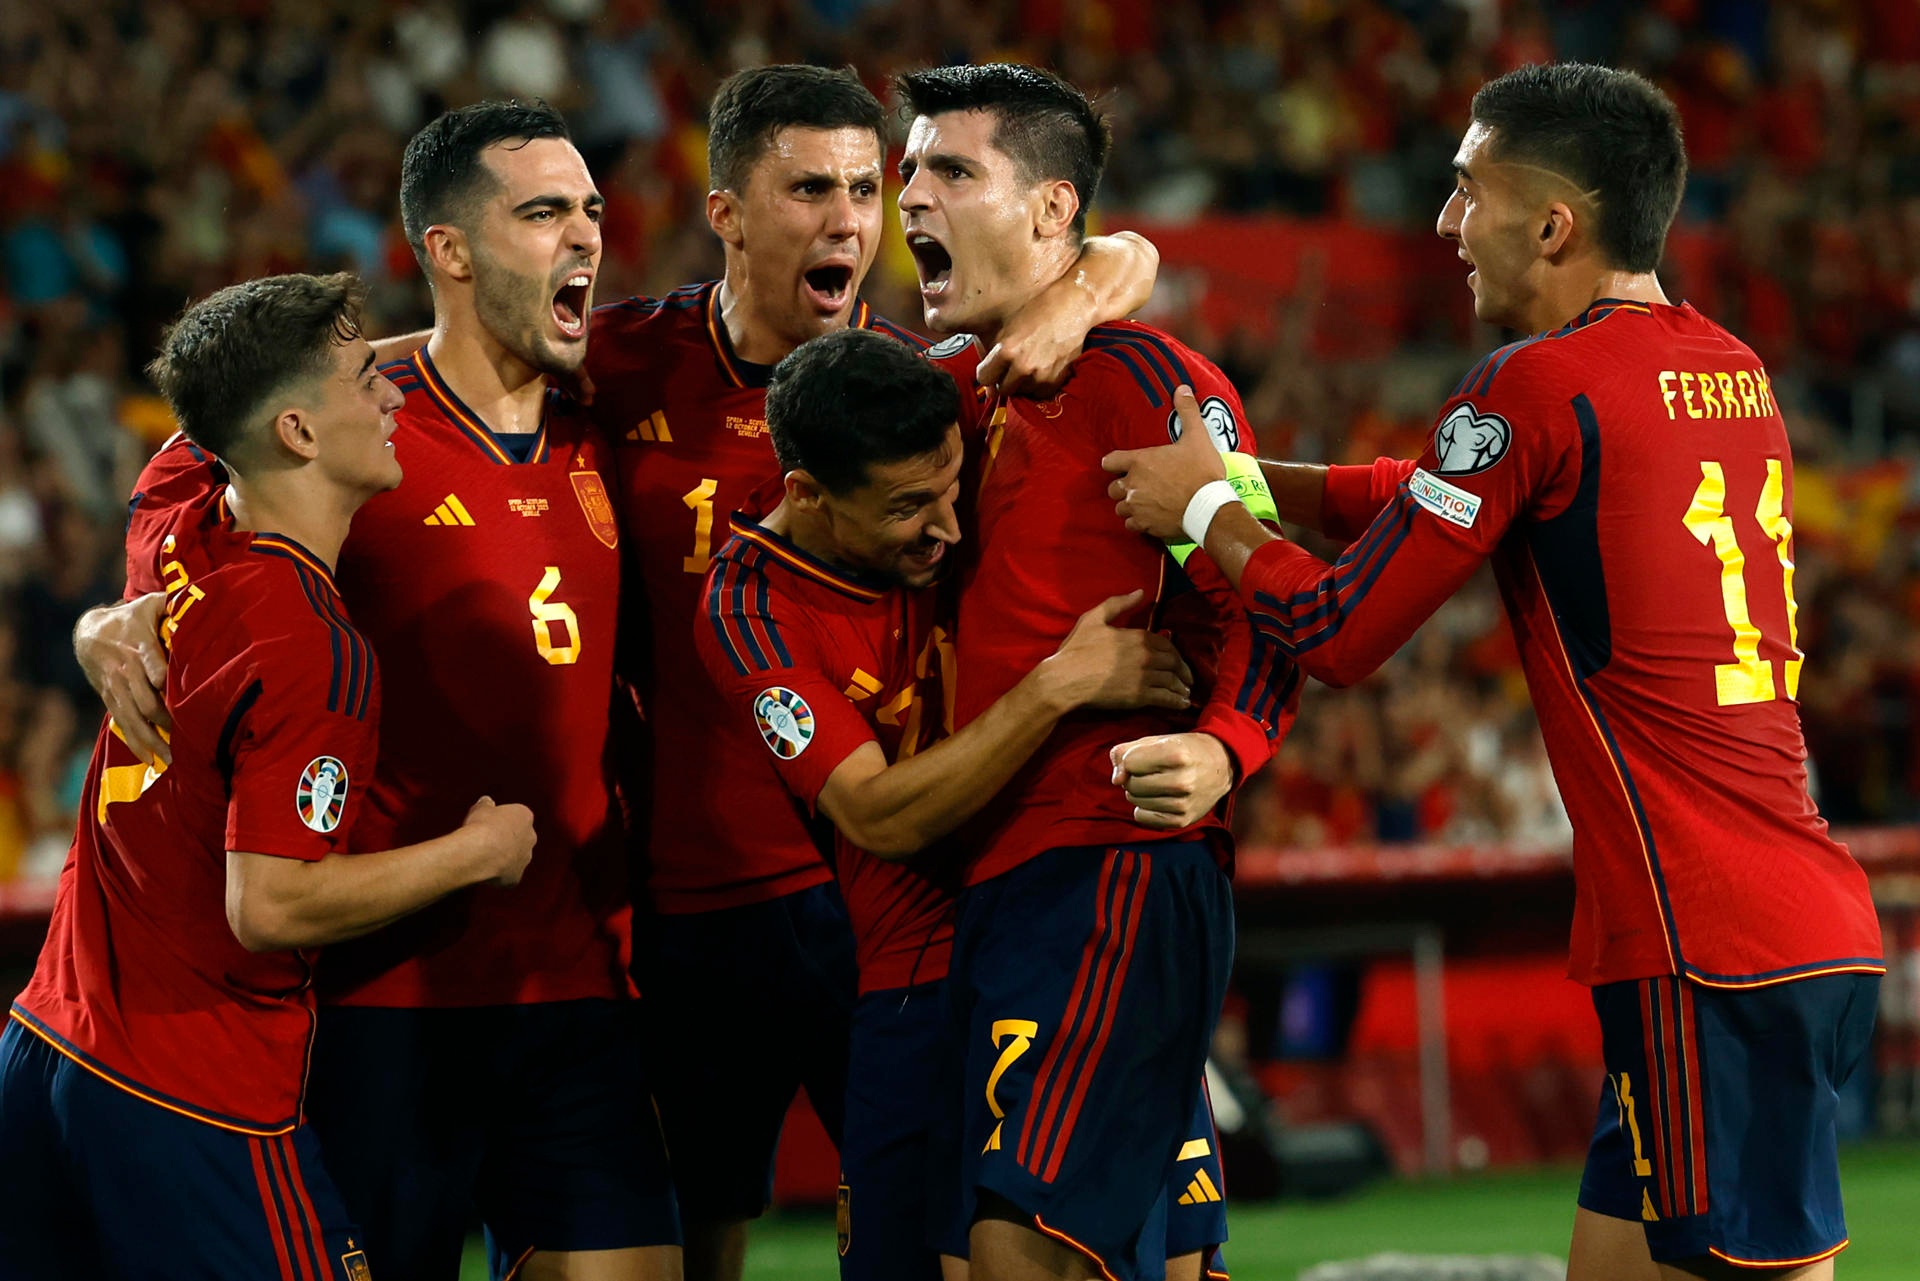 The Spanish Football Federation announced that Spain will take on Andorra on 5th June. The match will serve as a preparation for the European Championship.